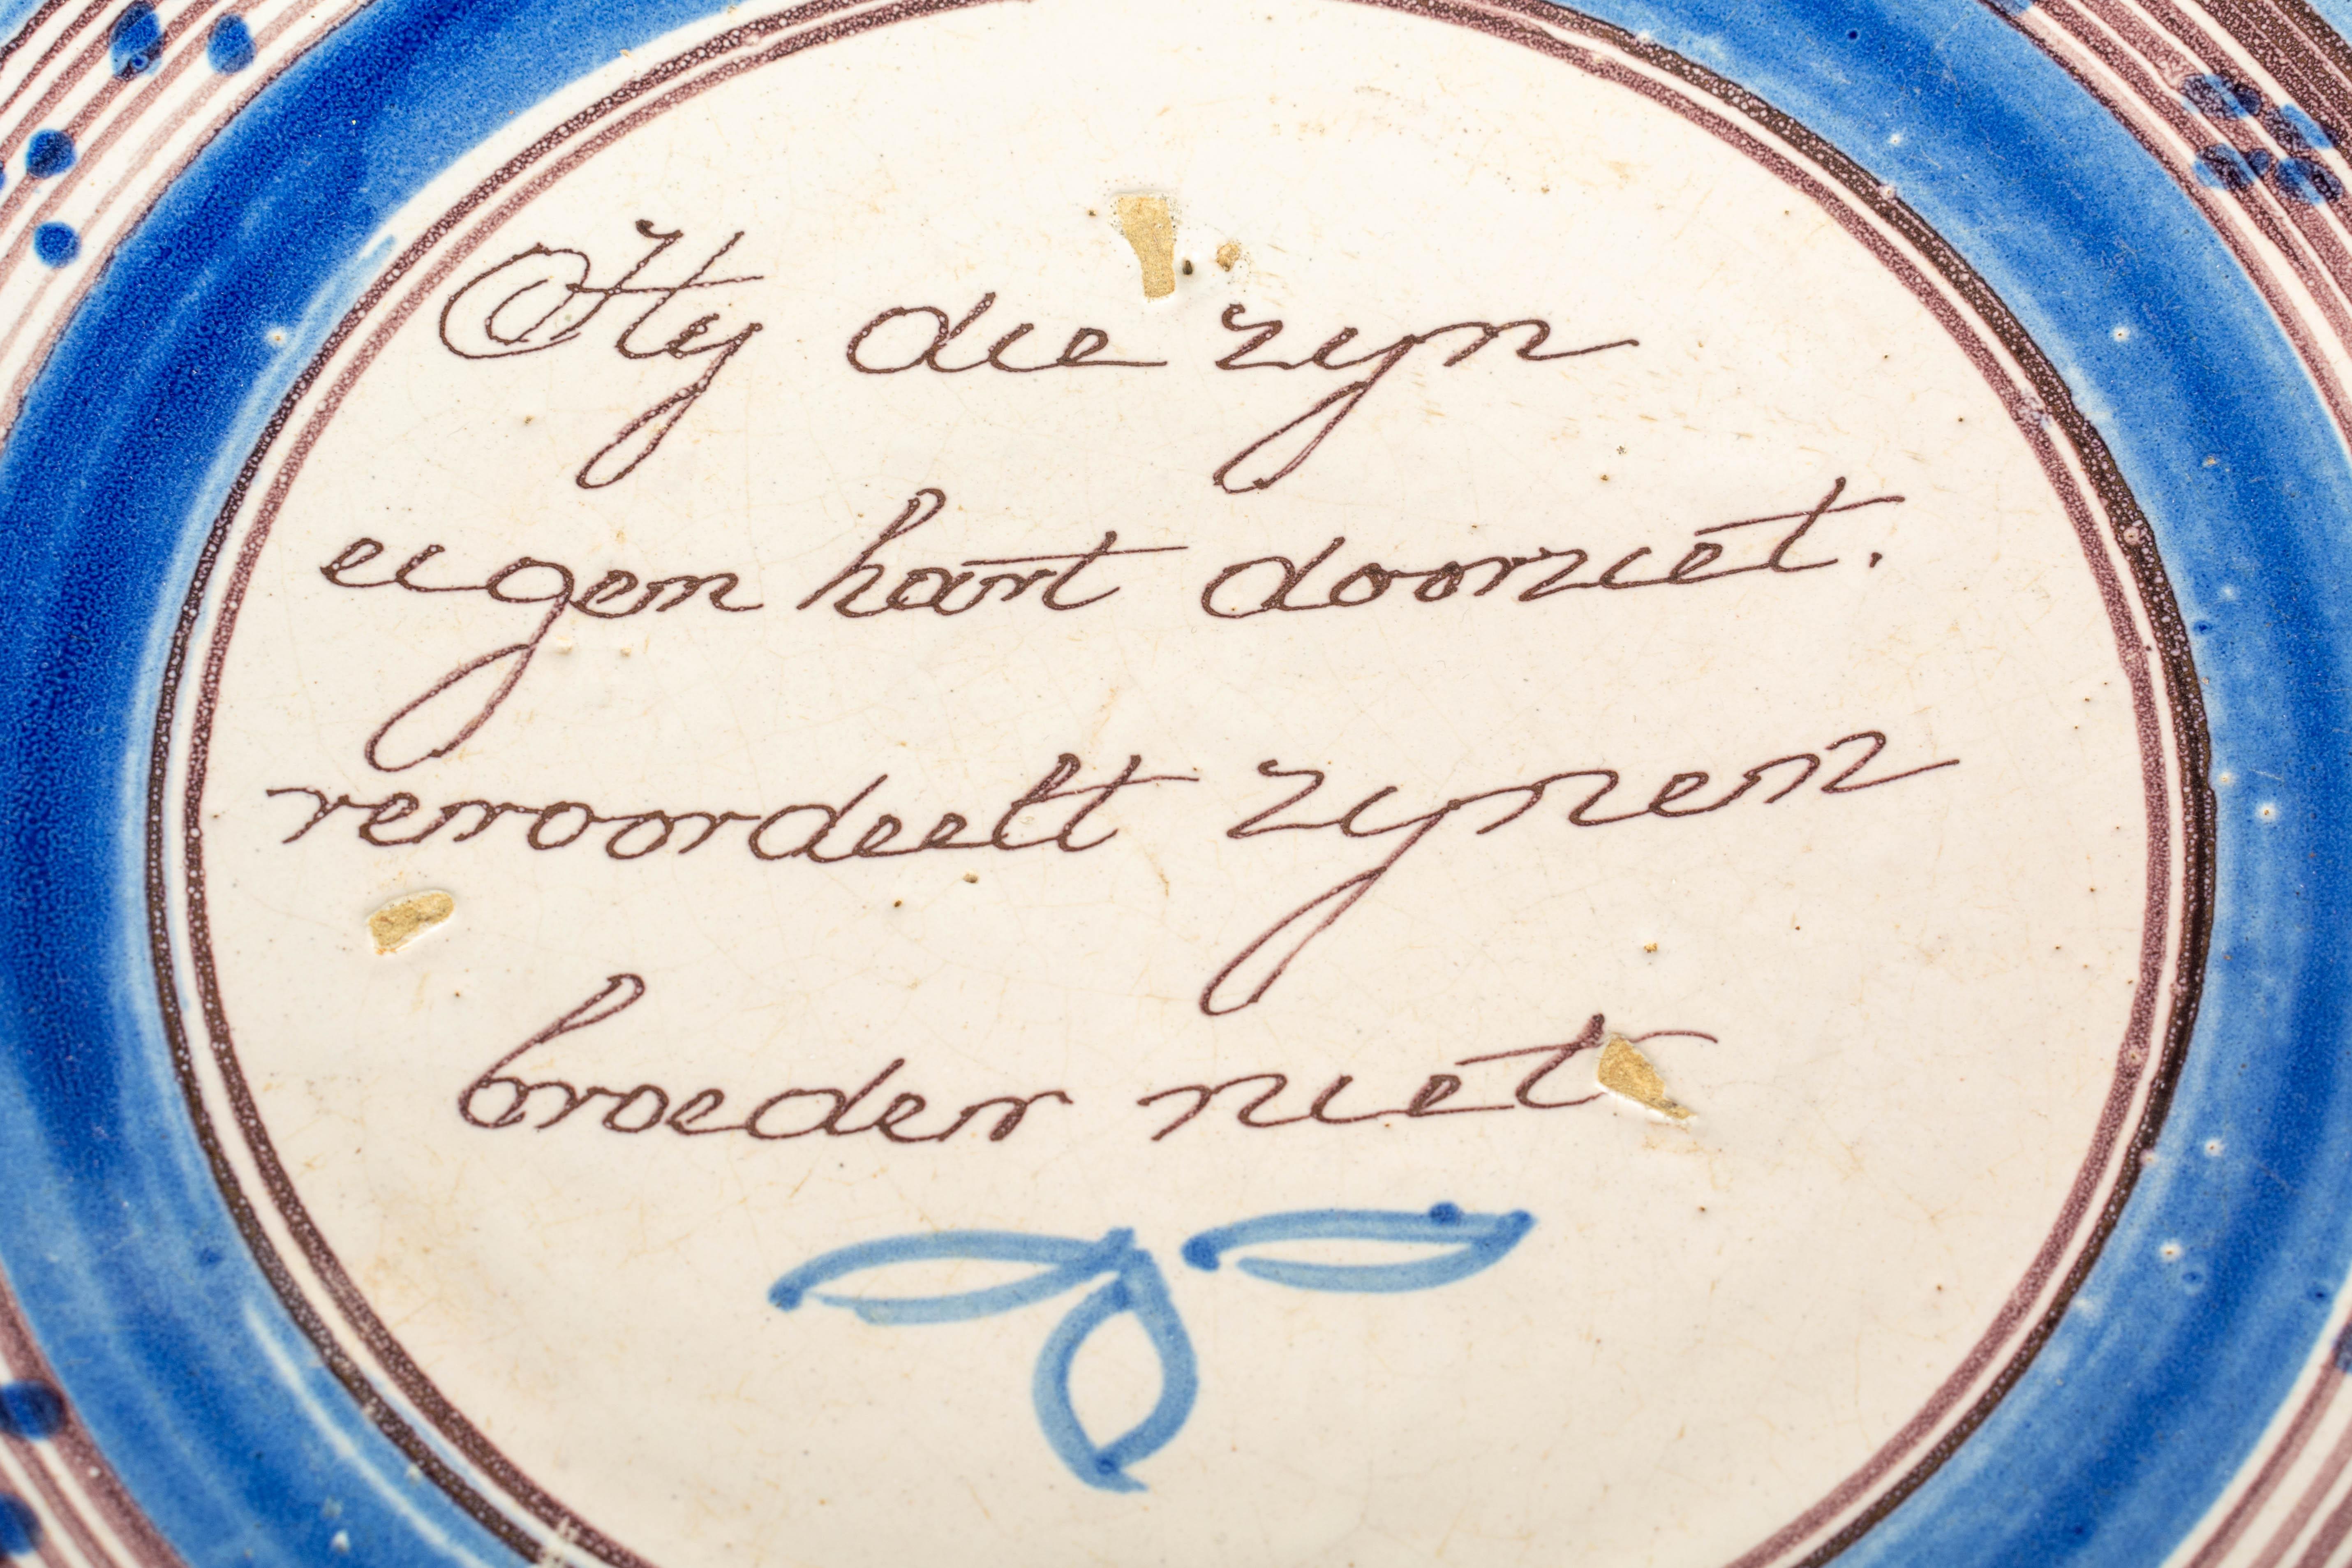 A large late 18th century delft earthenware shallow bowl or dish, decorated in blue, with a handwritten Dutch motto in the center. Rough translation: 